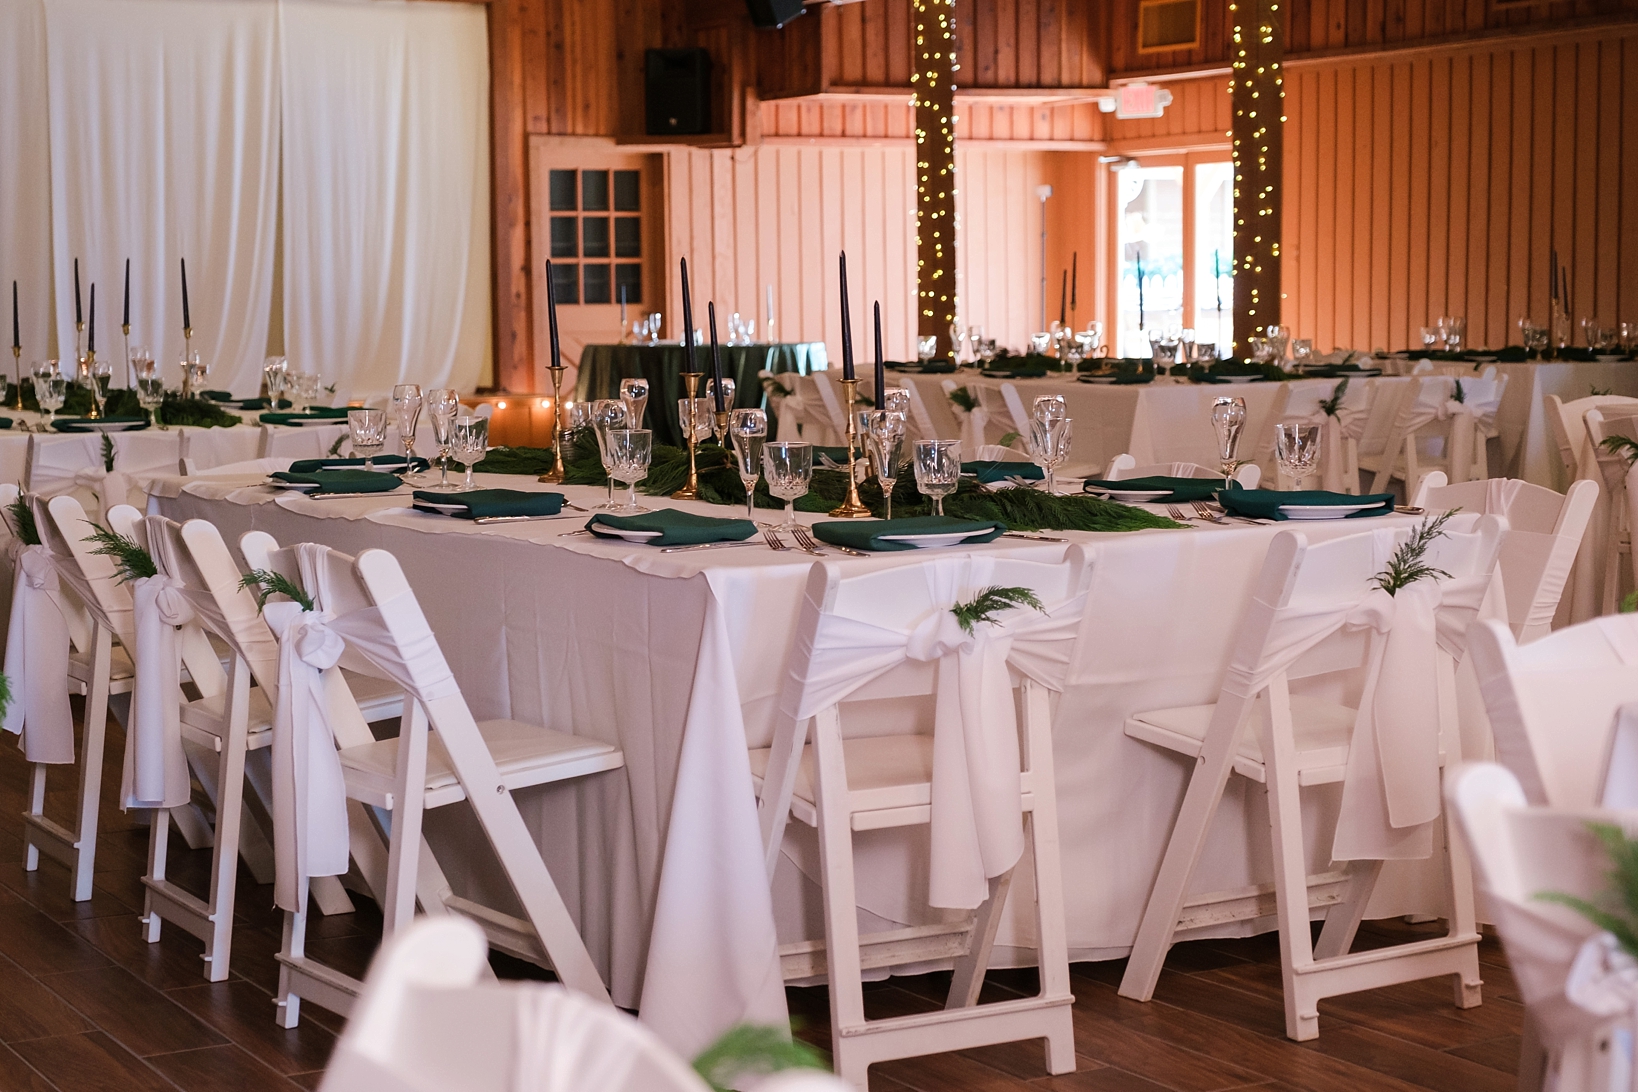 The formal settings at the reception included hunter green linens